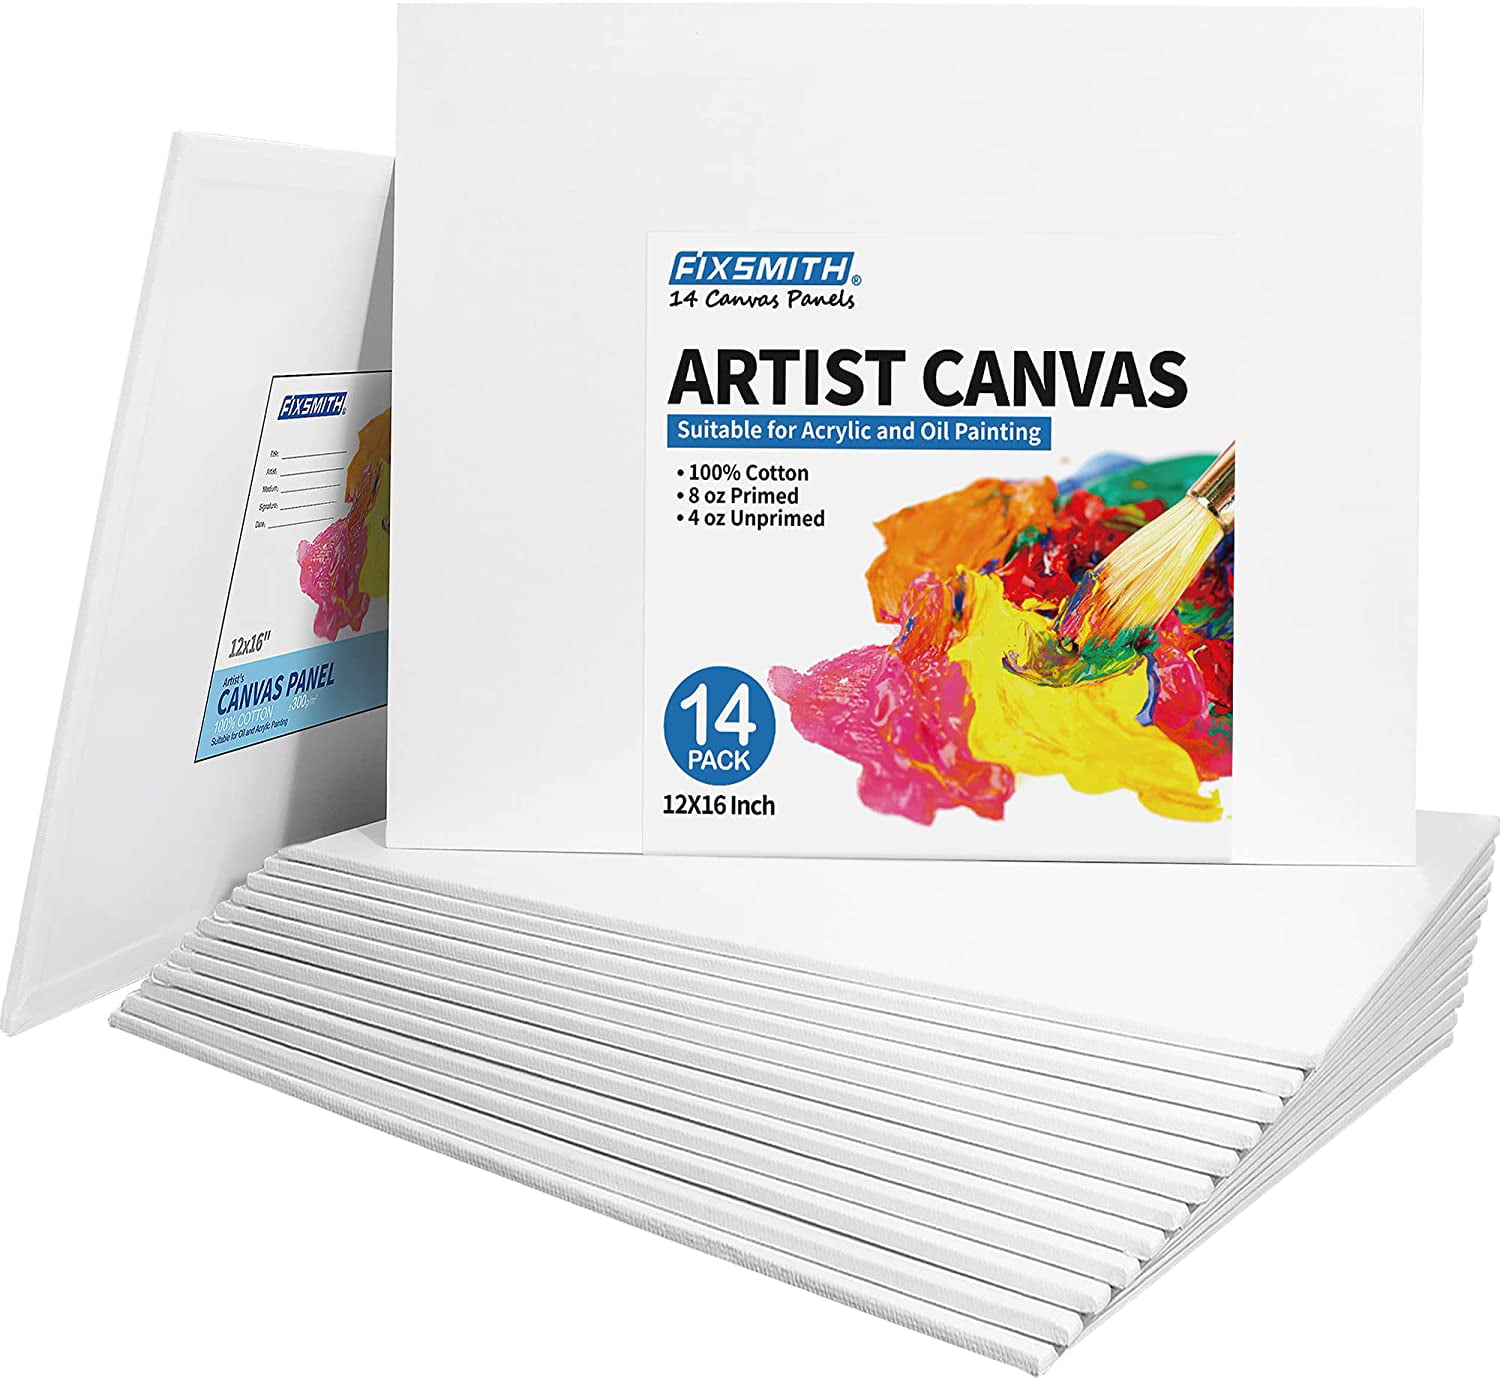 100% Cotton Primed Canvases Super Value Pack FIXSMITH Canvas Panels 14 Pack Oil & Tempera Painting Artist Canvas Board for Acrylic 12 x 16 Inch Painting Canvas Panel Boards 